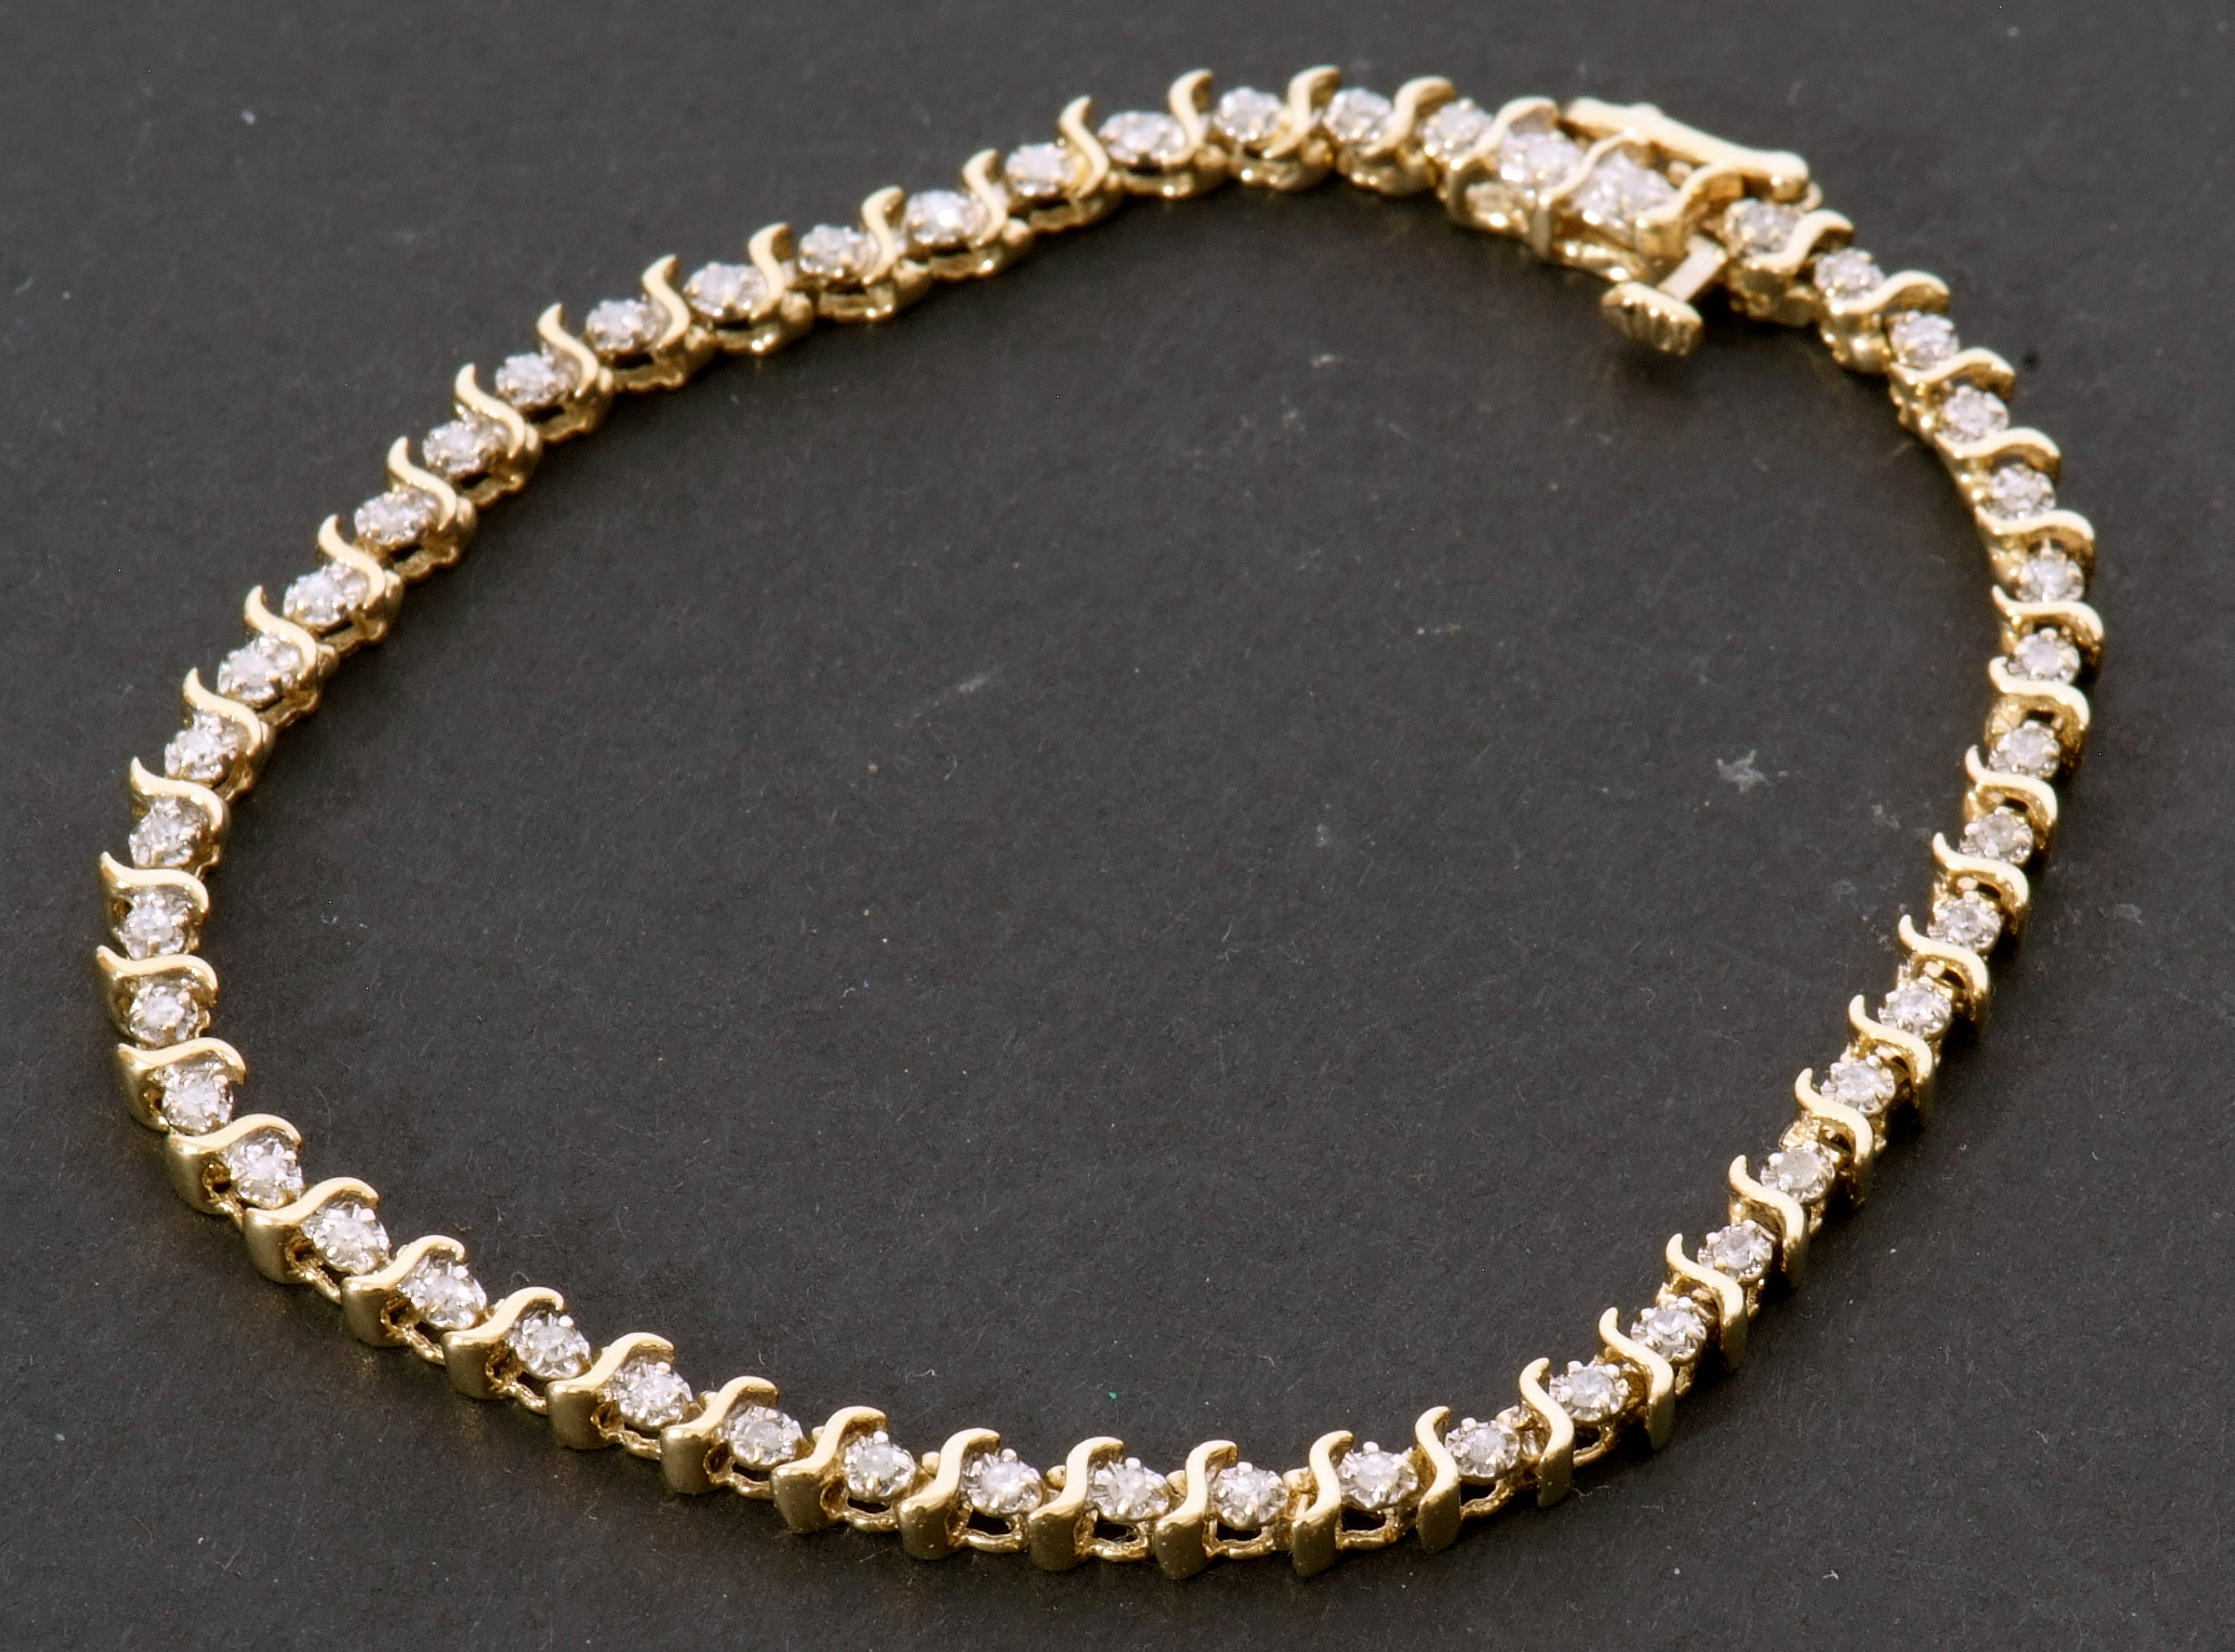 Diamond "tennis" bracelet featuring 49 small diamonds, individually claw set between S-links, - Image 9 of 9